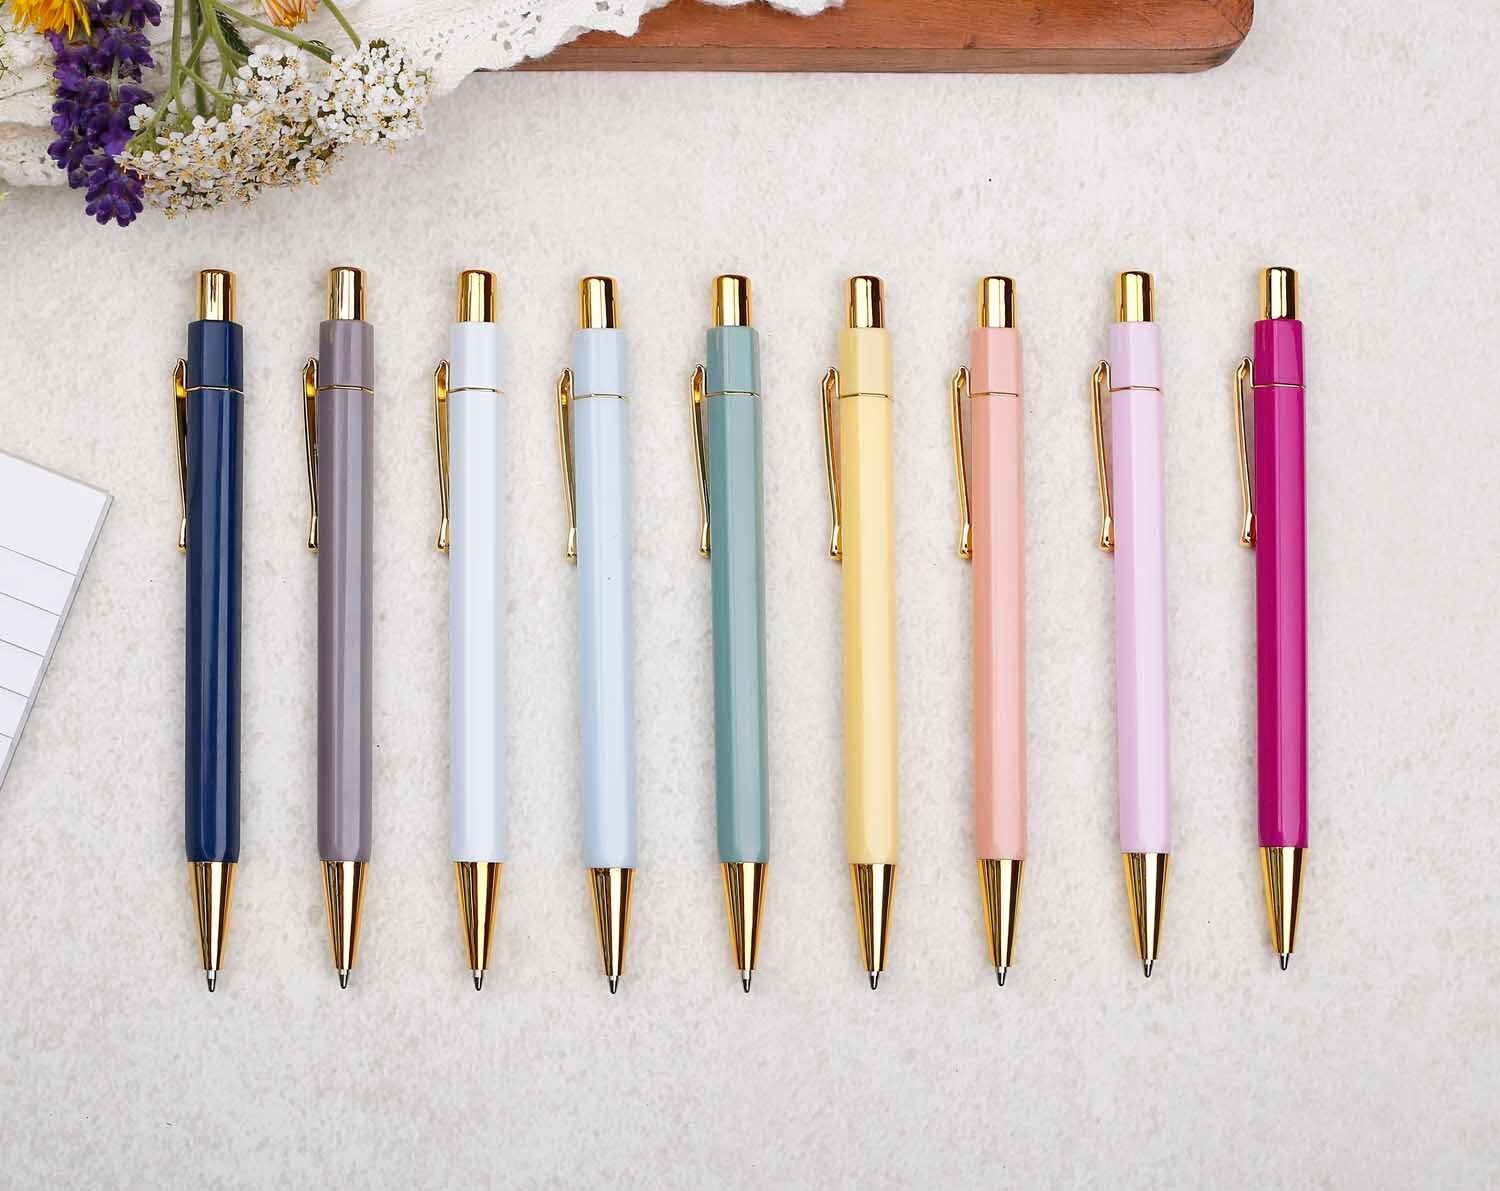 Authentigo Fancy Ballpoint Pen Set For Women, 2 Ballpoint Pens for  Journaling and Writing, Inspirational Pen Gift Box, Gold Pen and Pink Pen  with Gold